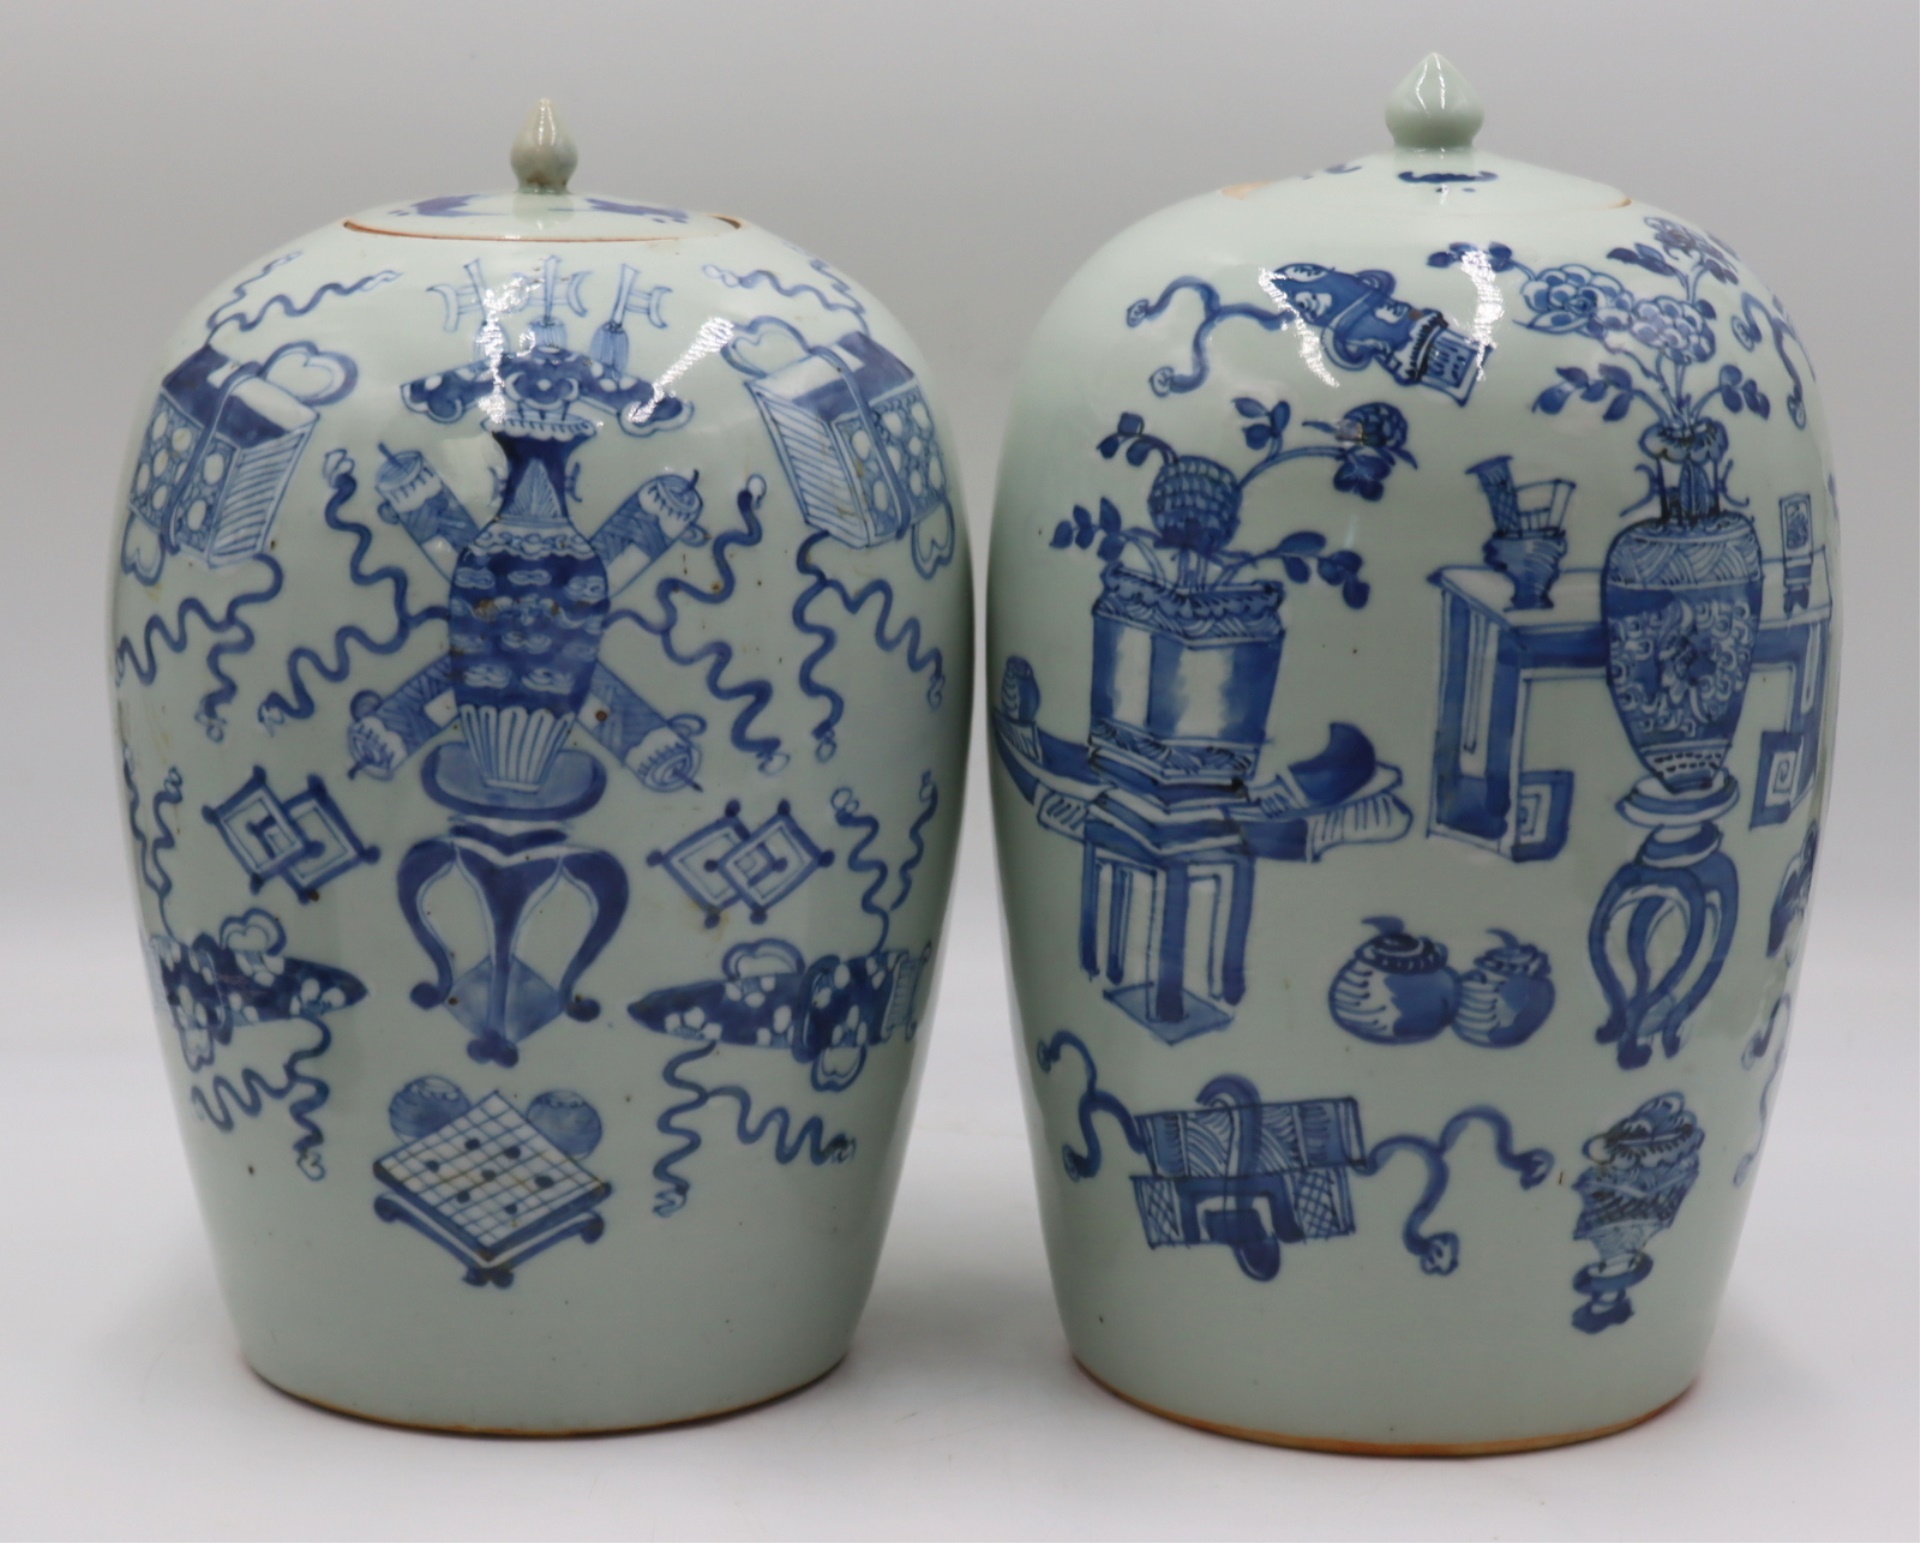 NEAR PAIR OF CHINESE CELADON BLUE